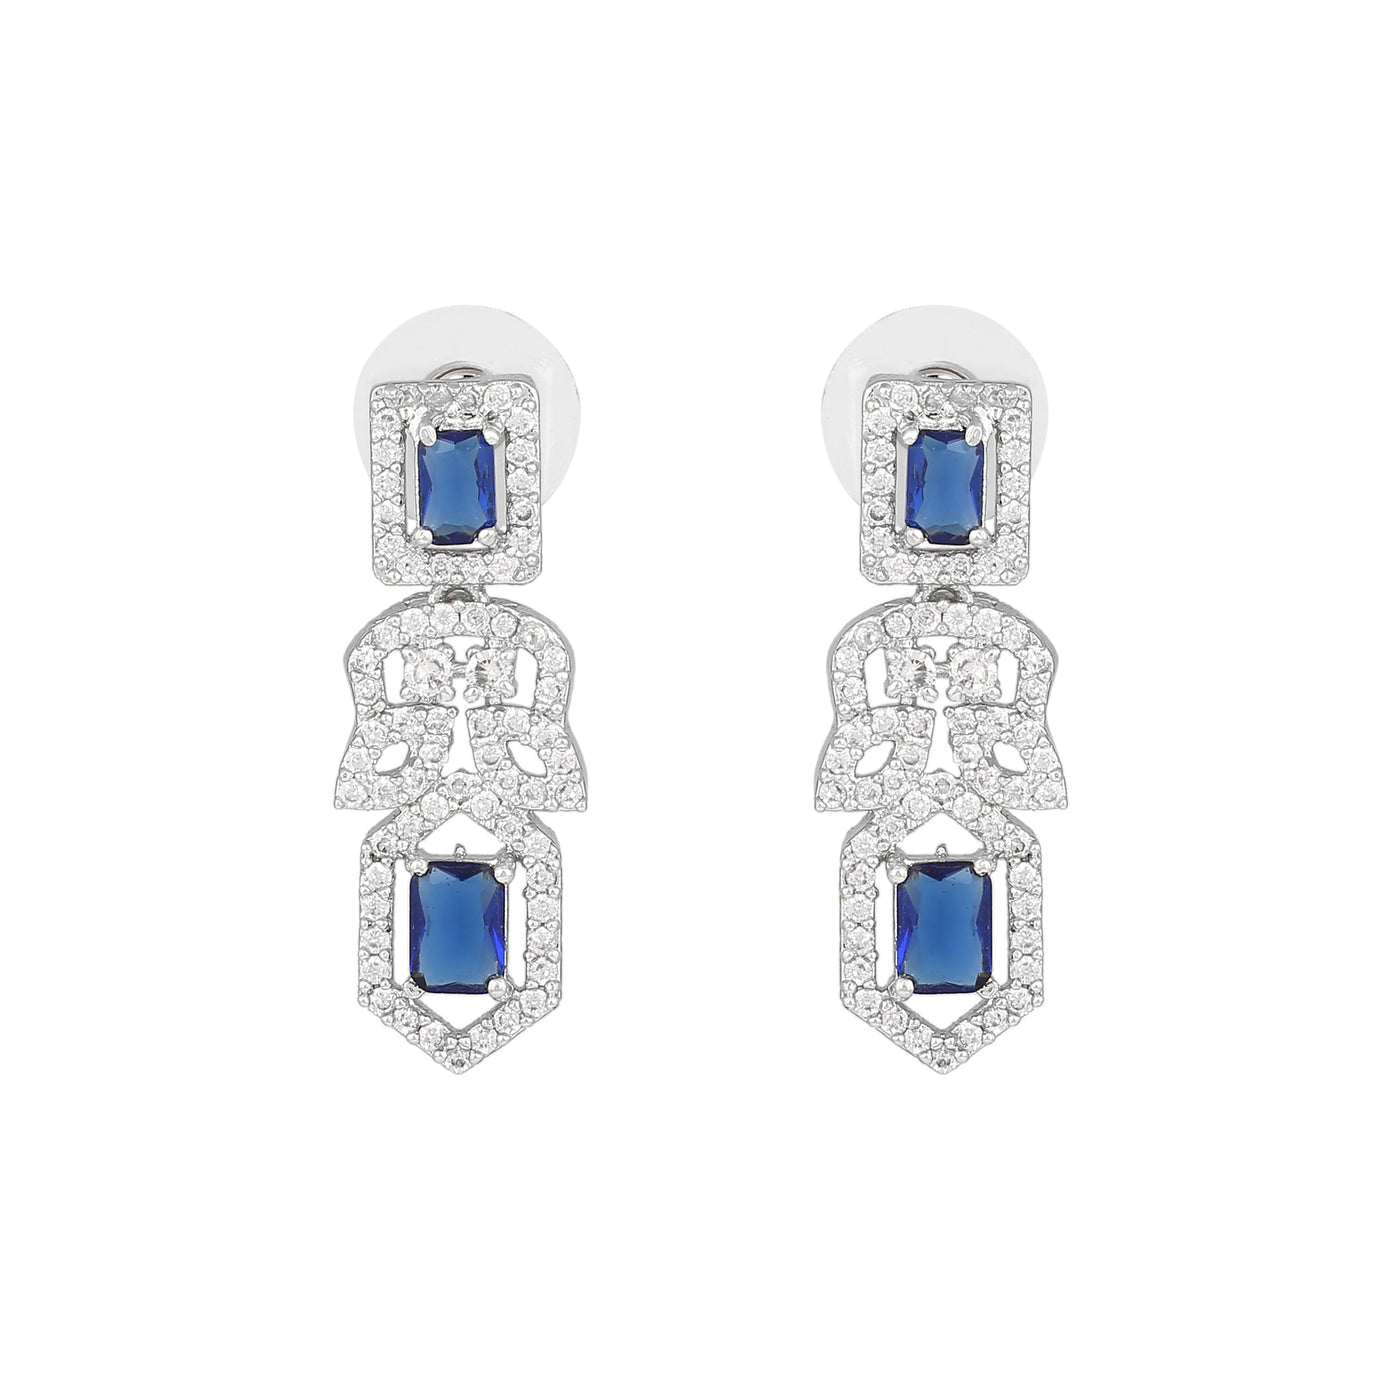 Estele Rhodium Plated CZ Sparkling Designer Earrings with Blue Crystals for Women